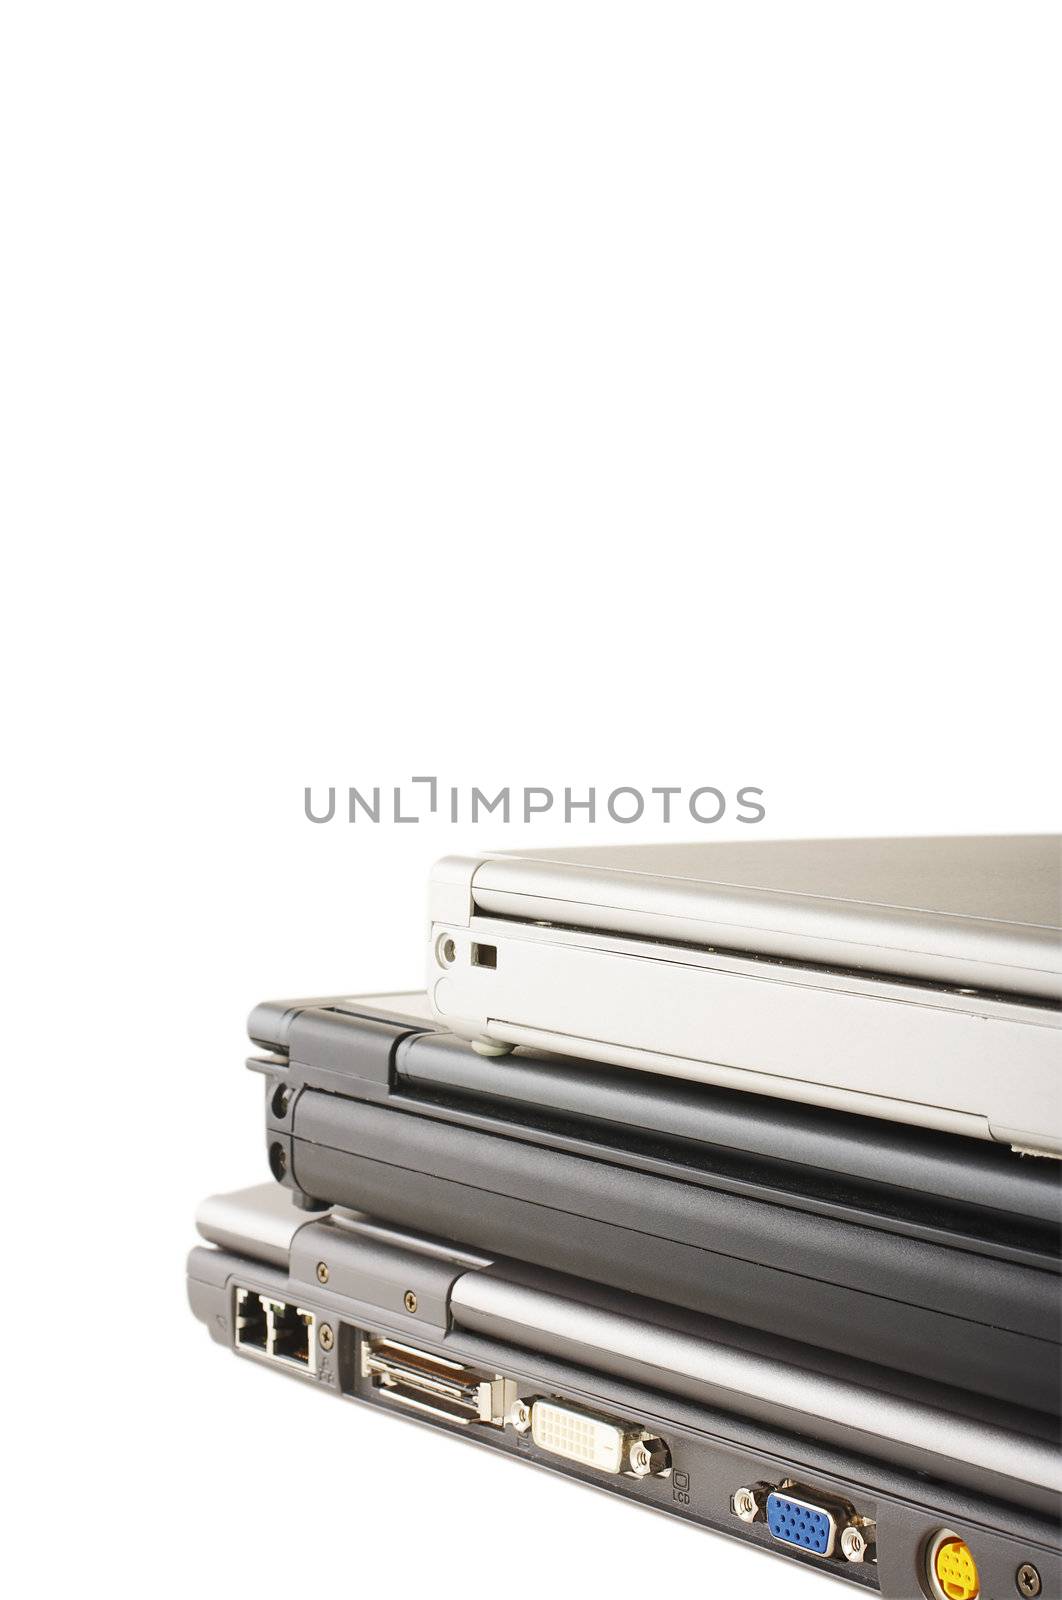 Three laptops stacked on the white background